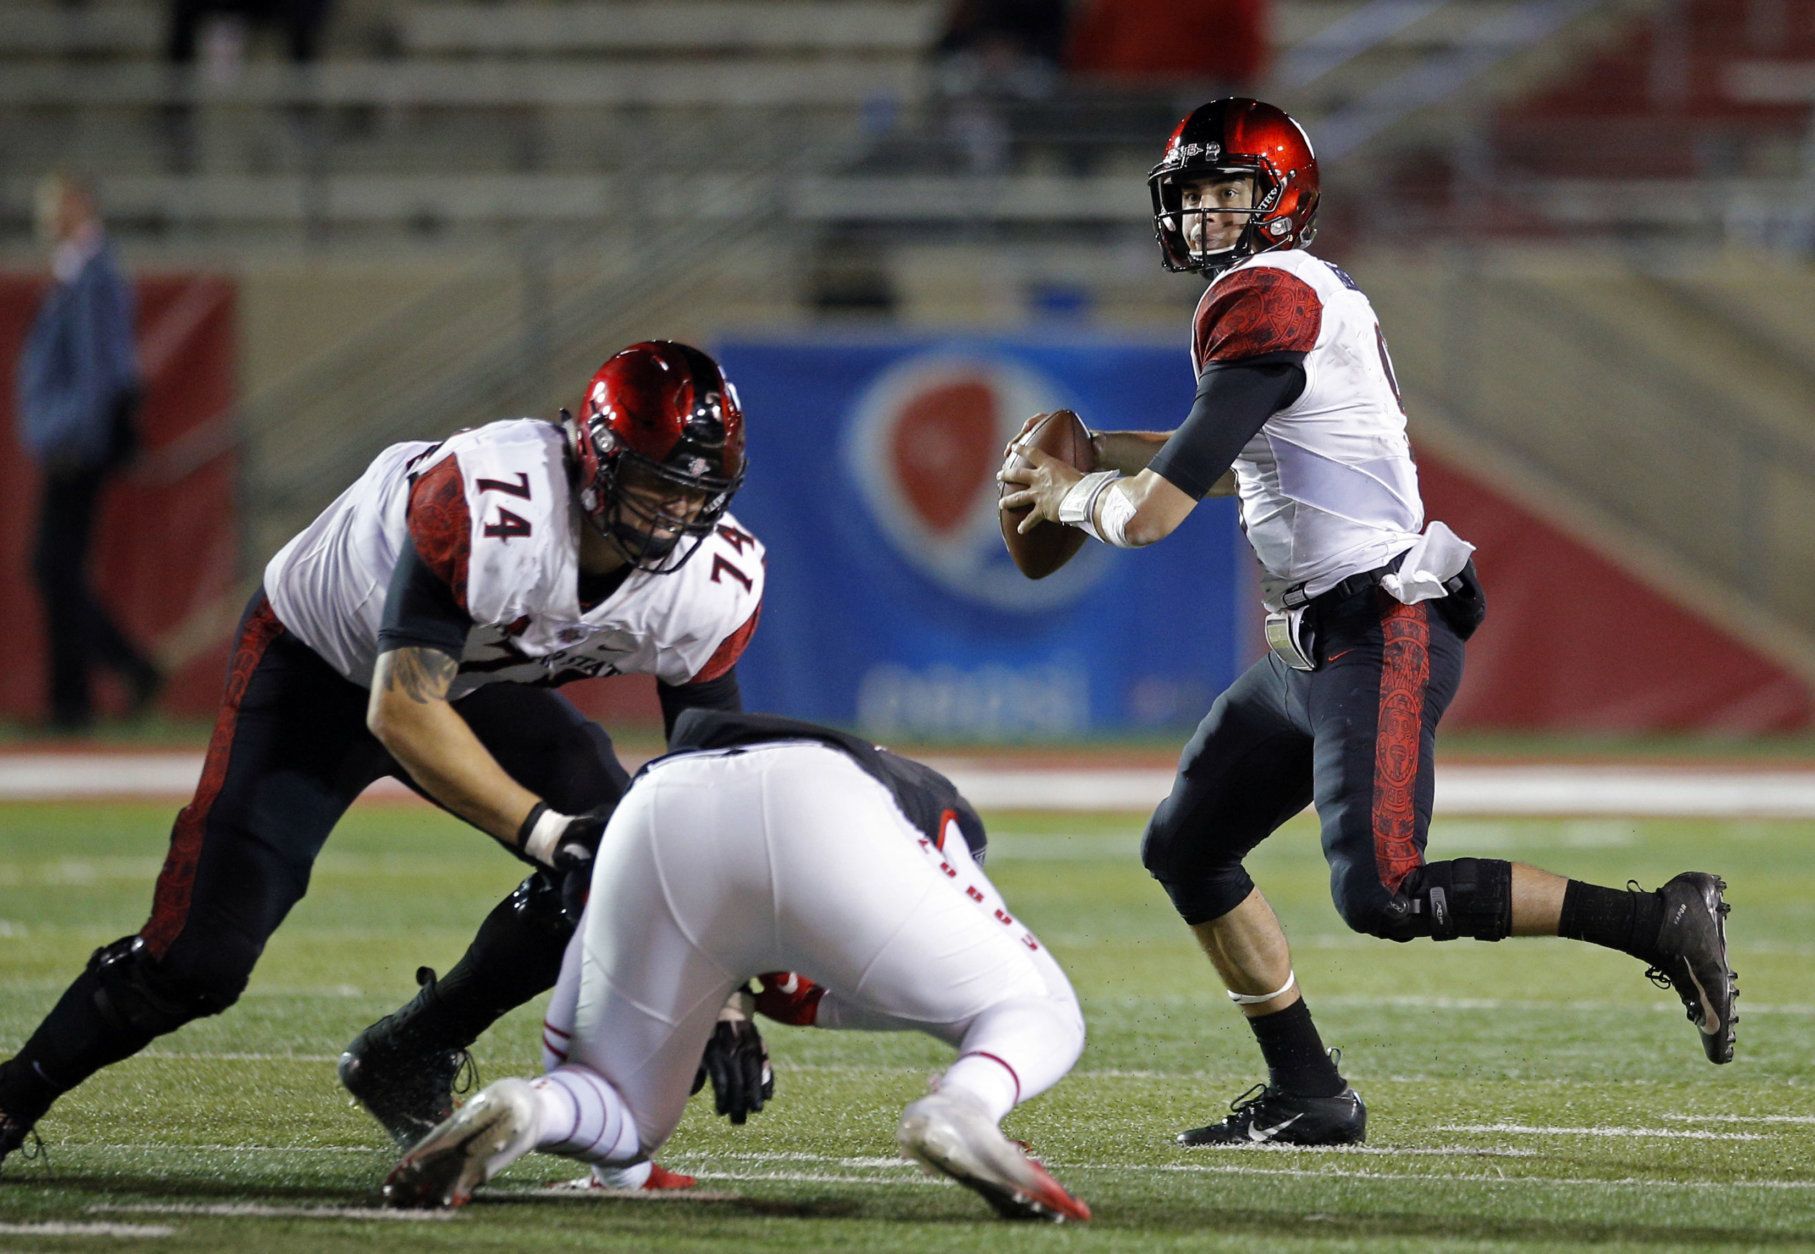 San Diego State quarterback Ryan Agnew, right, throws as offensive lineman Tyler Roemer (74) contains a New Mexico defender during the first half of an NCAA college football game in Albuquerque, N.M., Saturday, Nov. 3, 2018. (AP Photo/Andres Leighton)